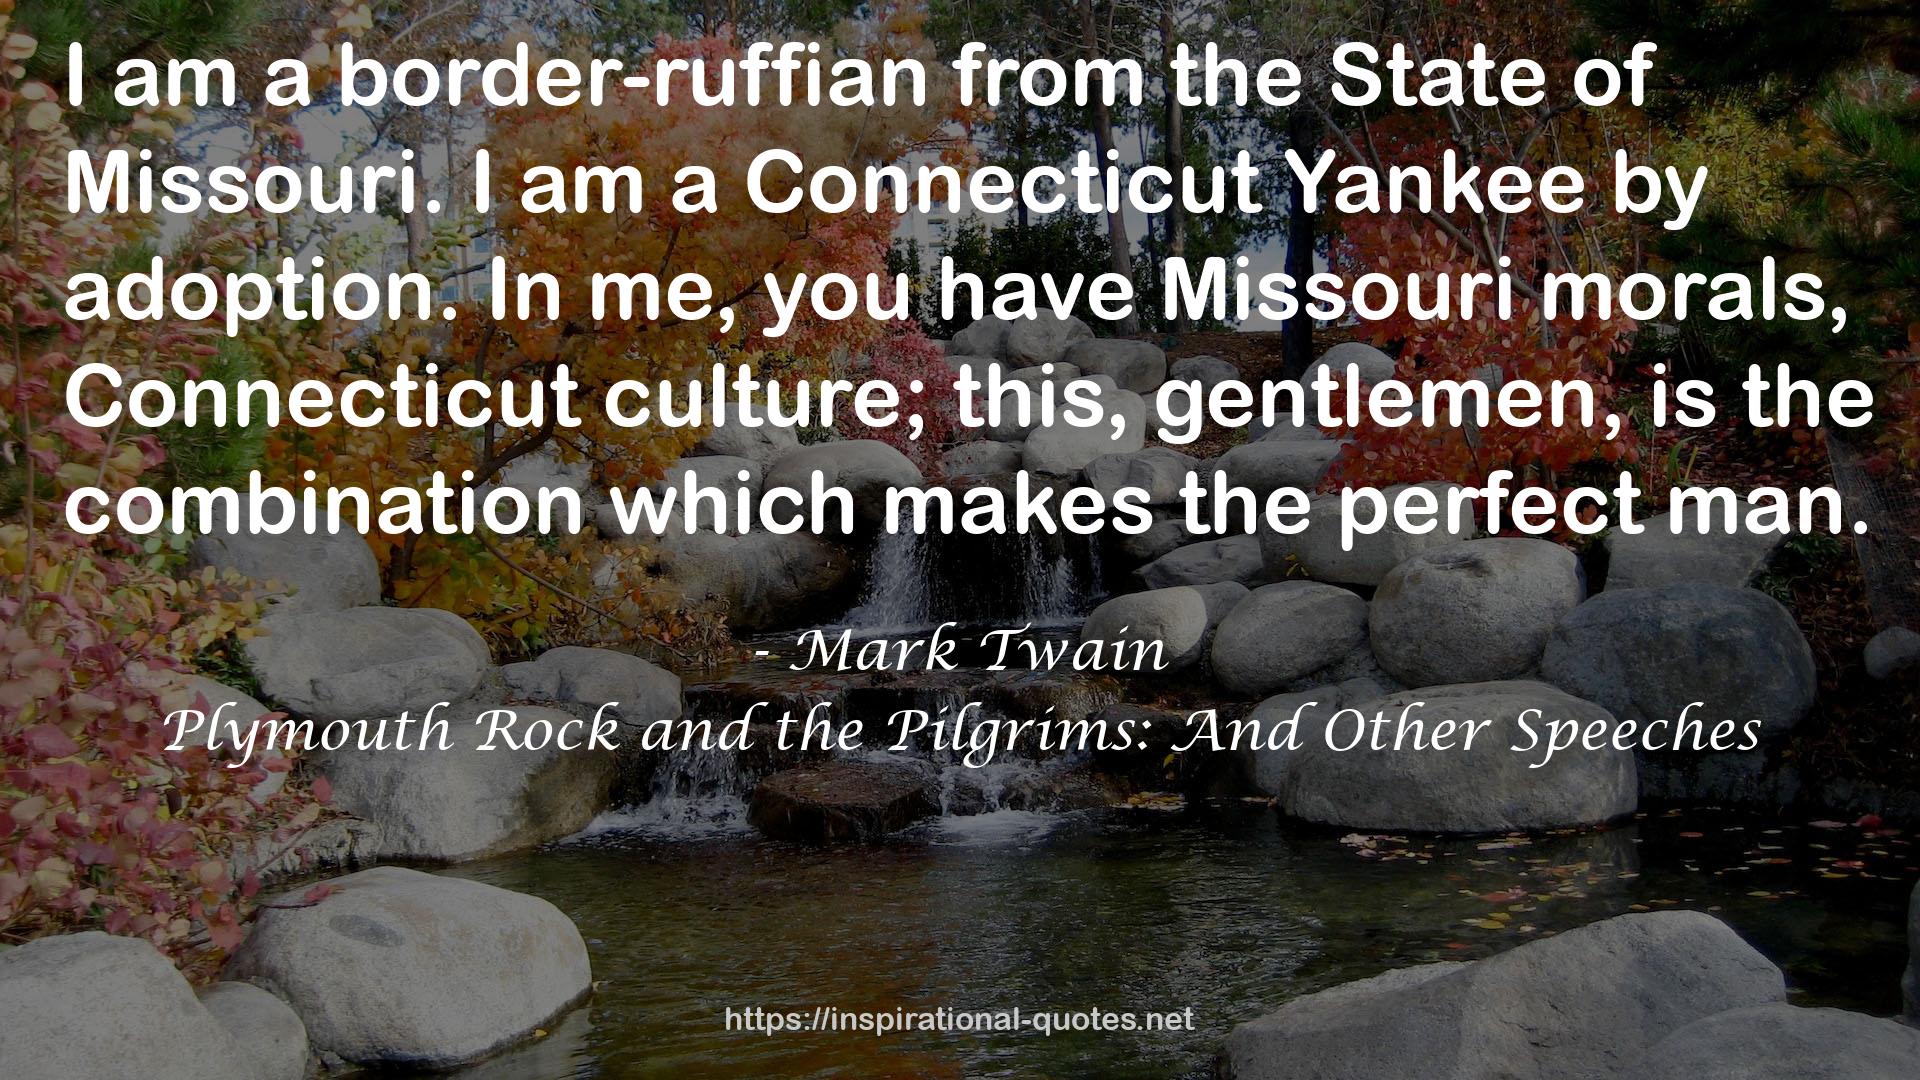 Plymouth Rock and the Pilgrims: And Other Speeches QUOTES